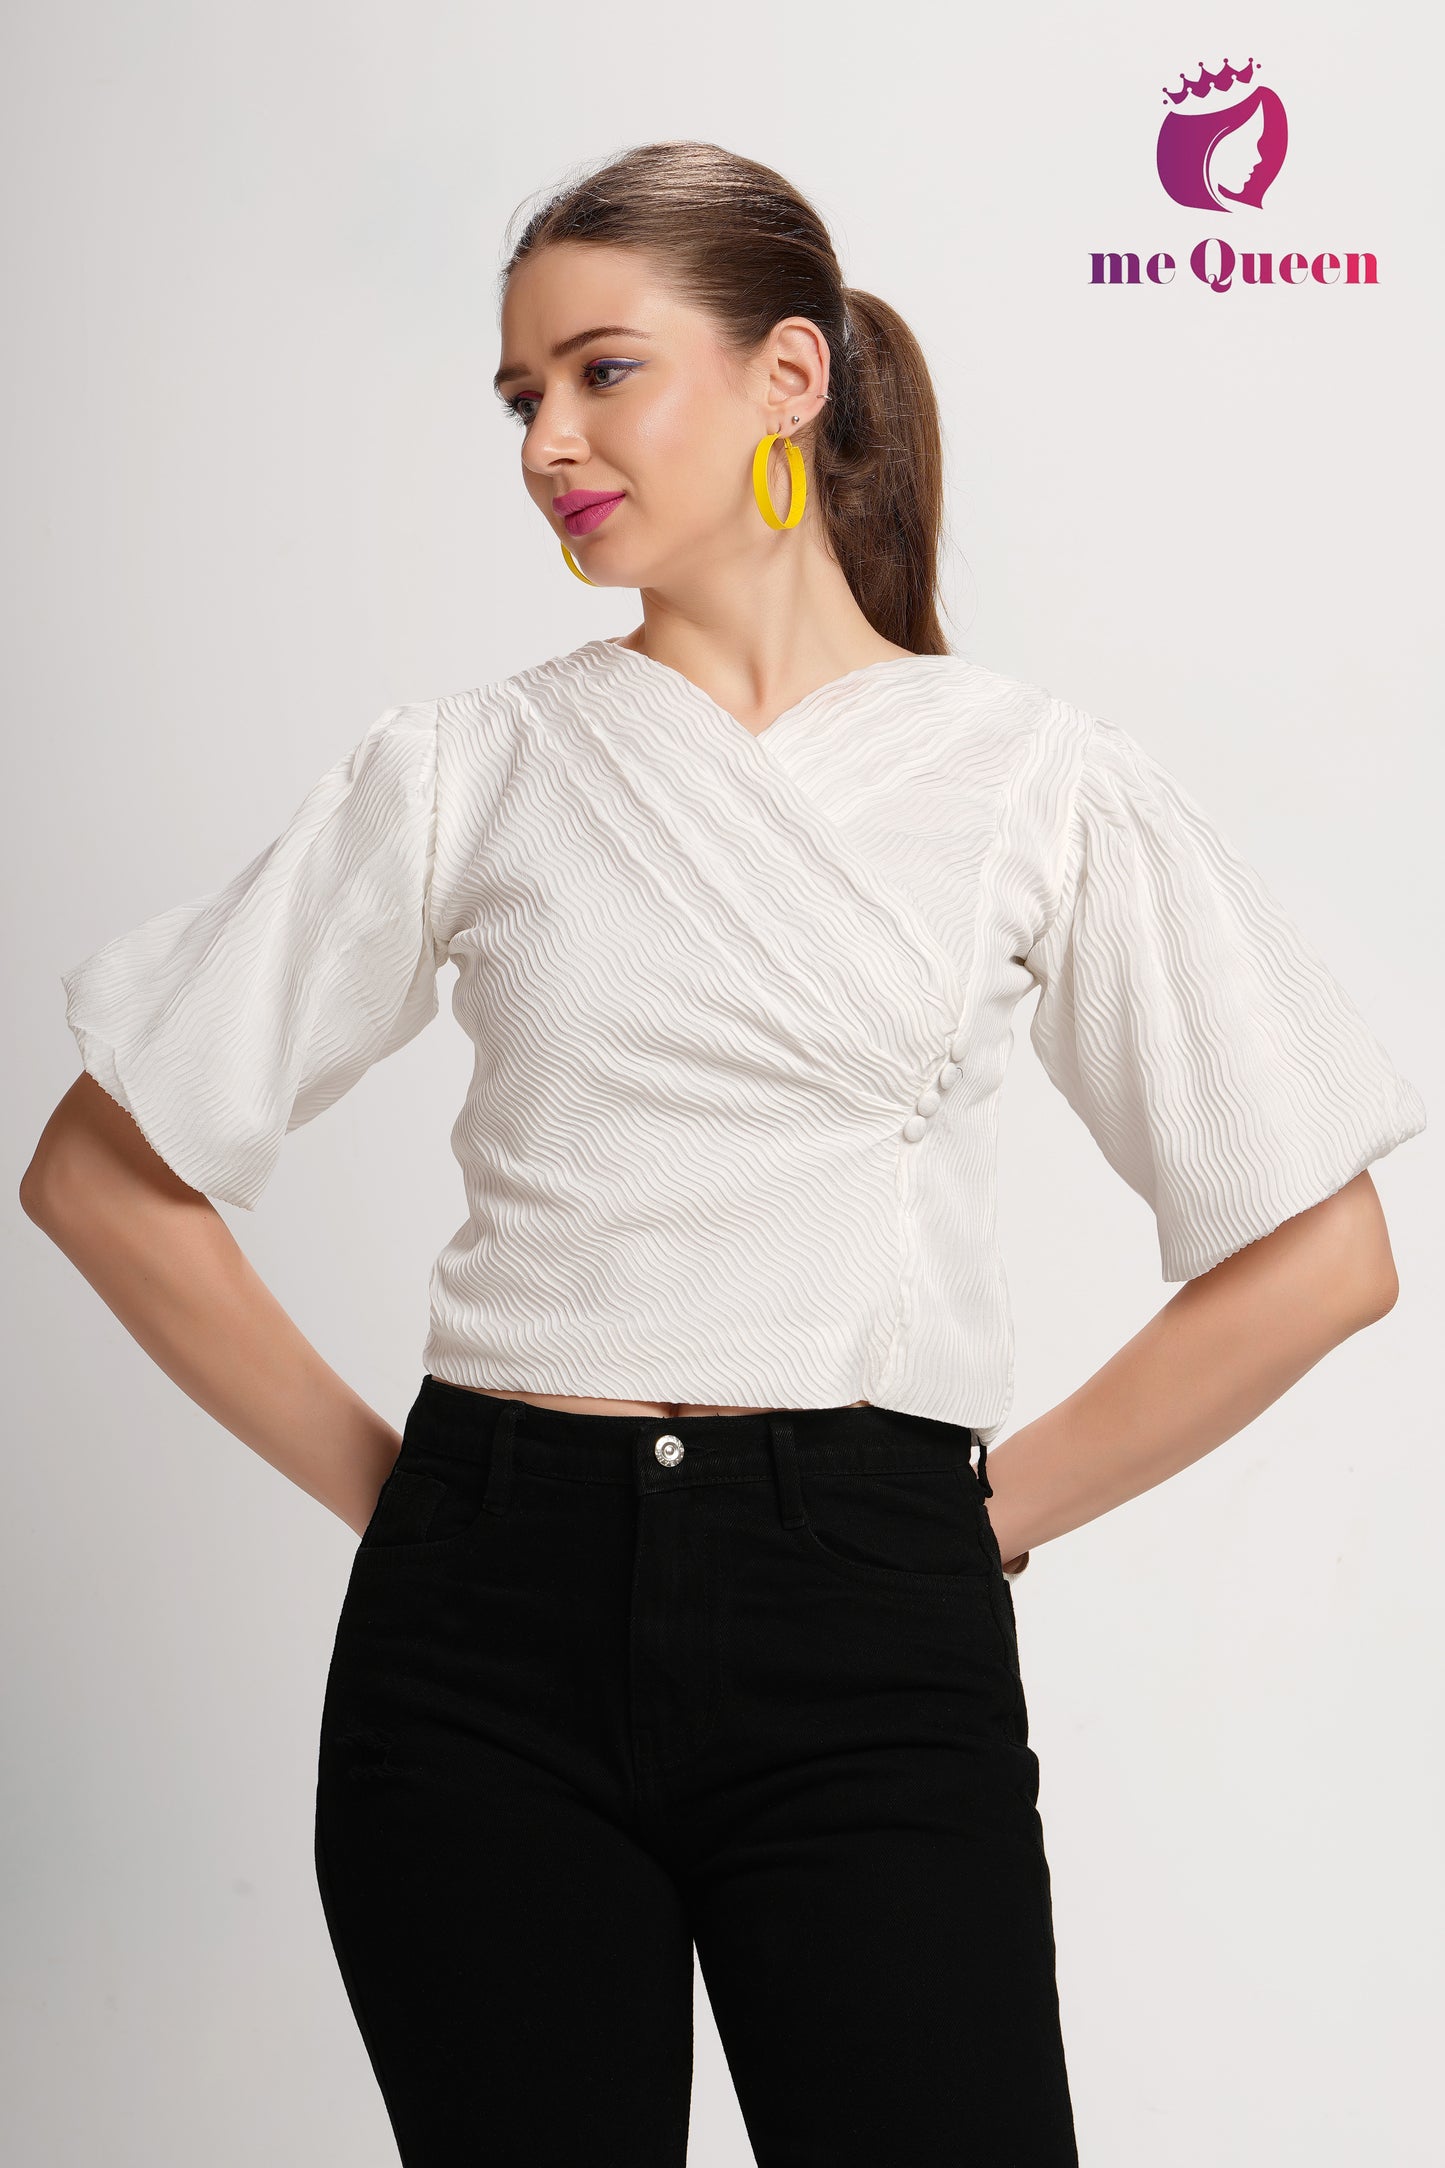 MeQueen's Women's Stylish Pattern White Top with Puff Sleeves